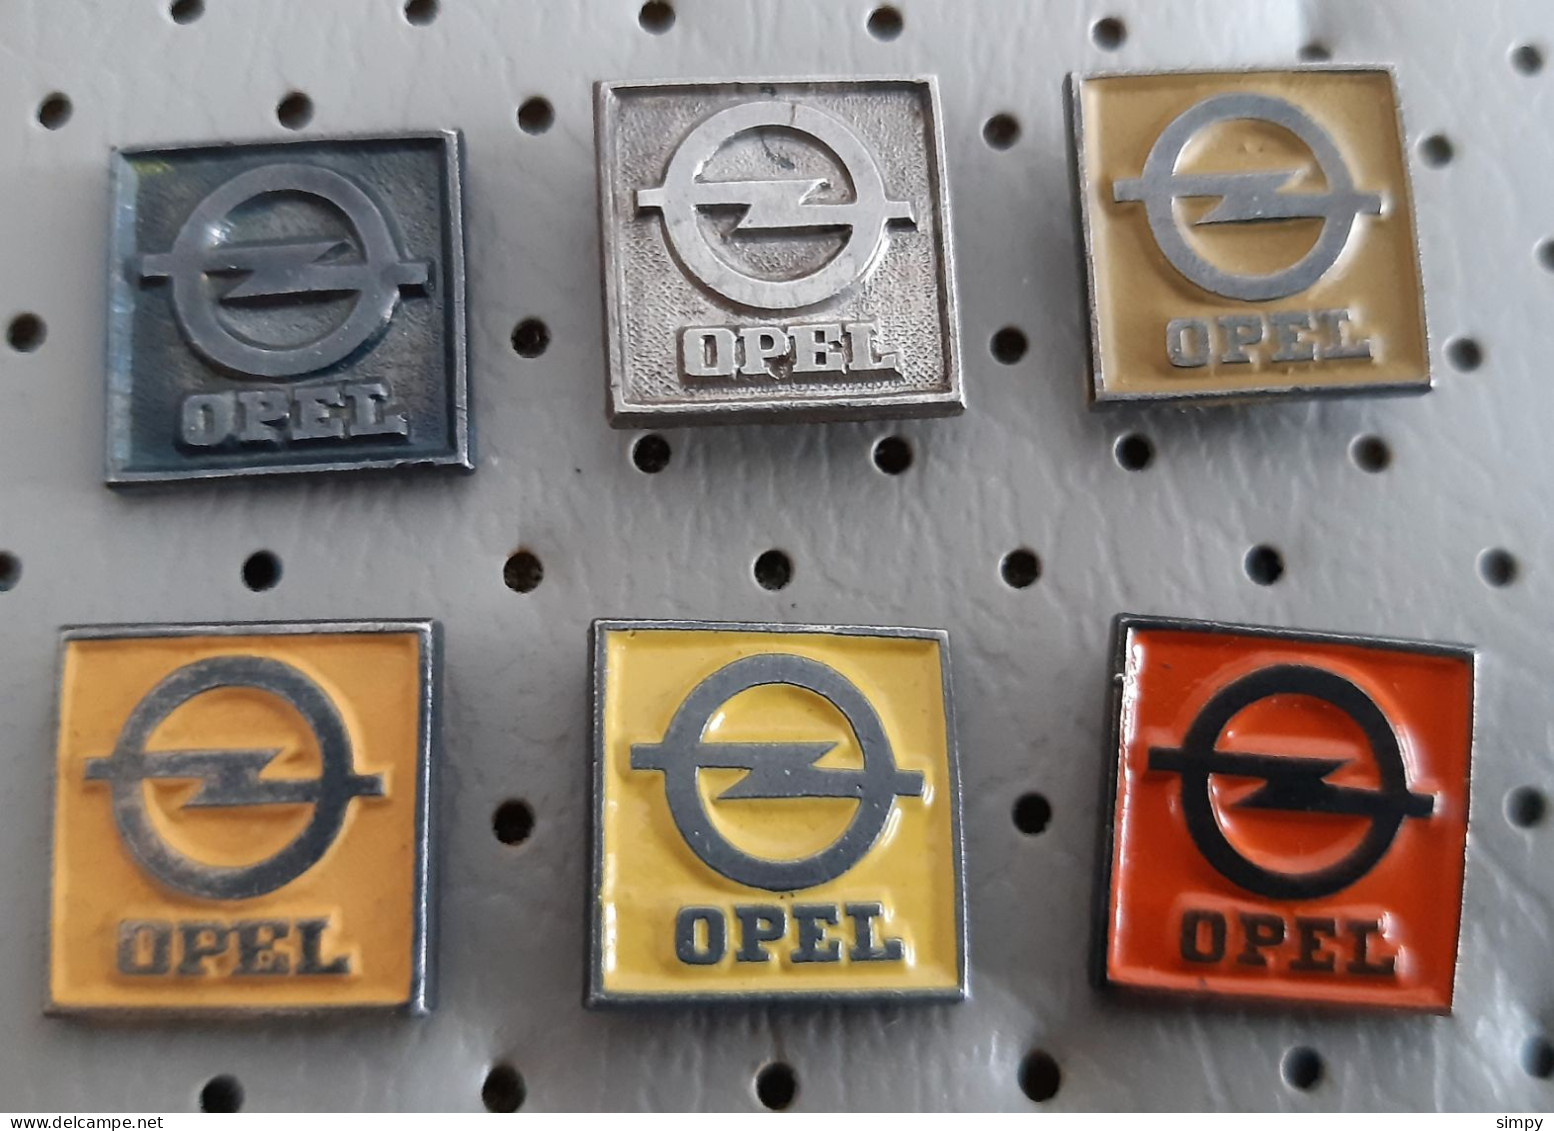 OPEL Car Logo 6 Different Vintage Pins Badge - Opel